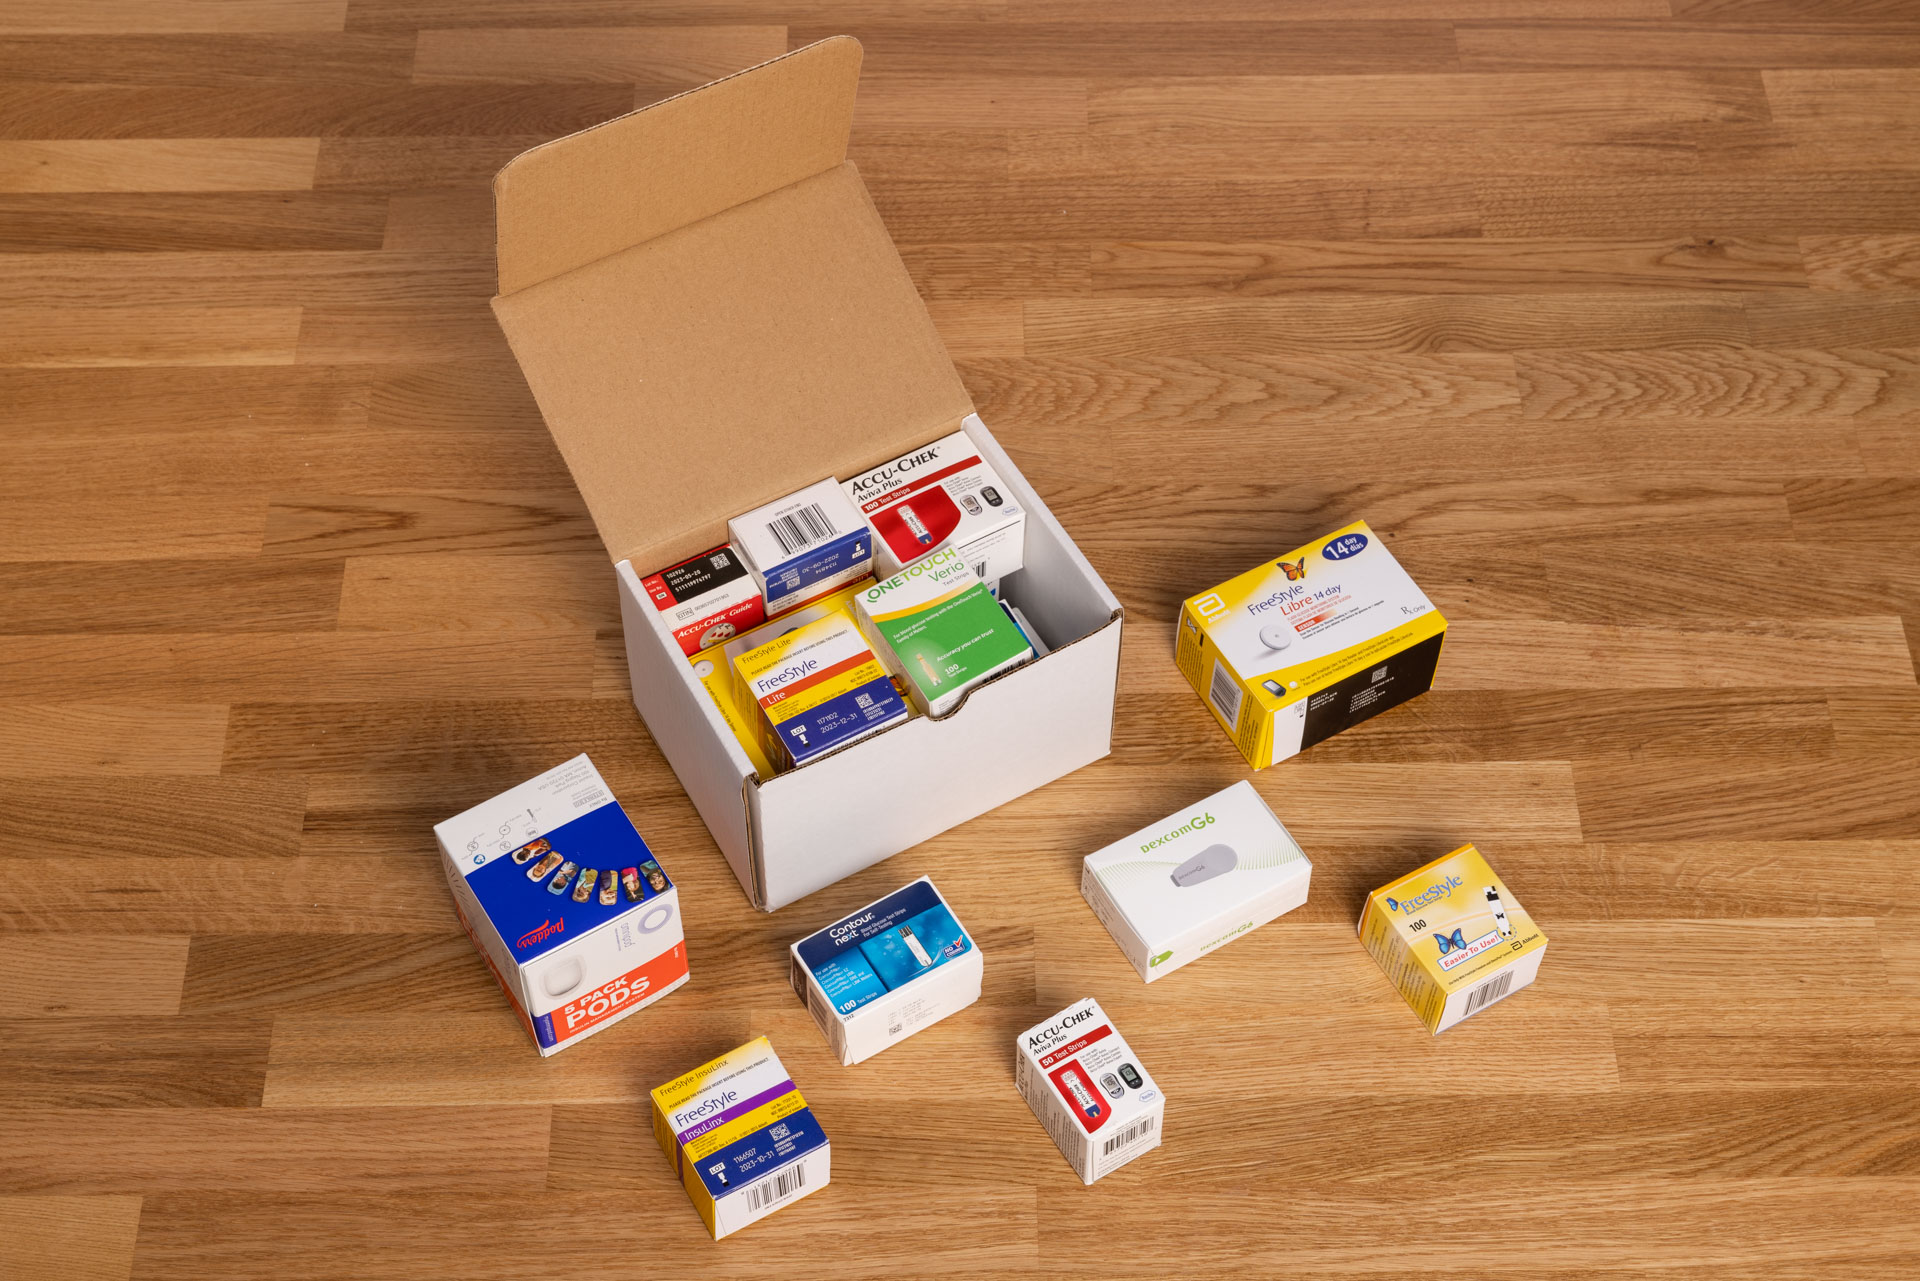 box of diabetic supplies being sent to cash for diabetics to get Fast Cash for Test Strips